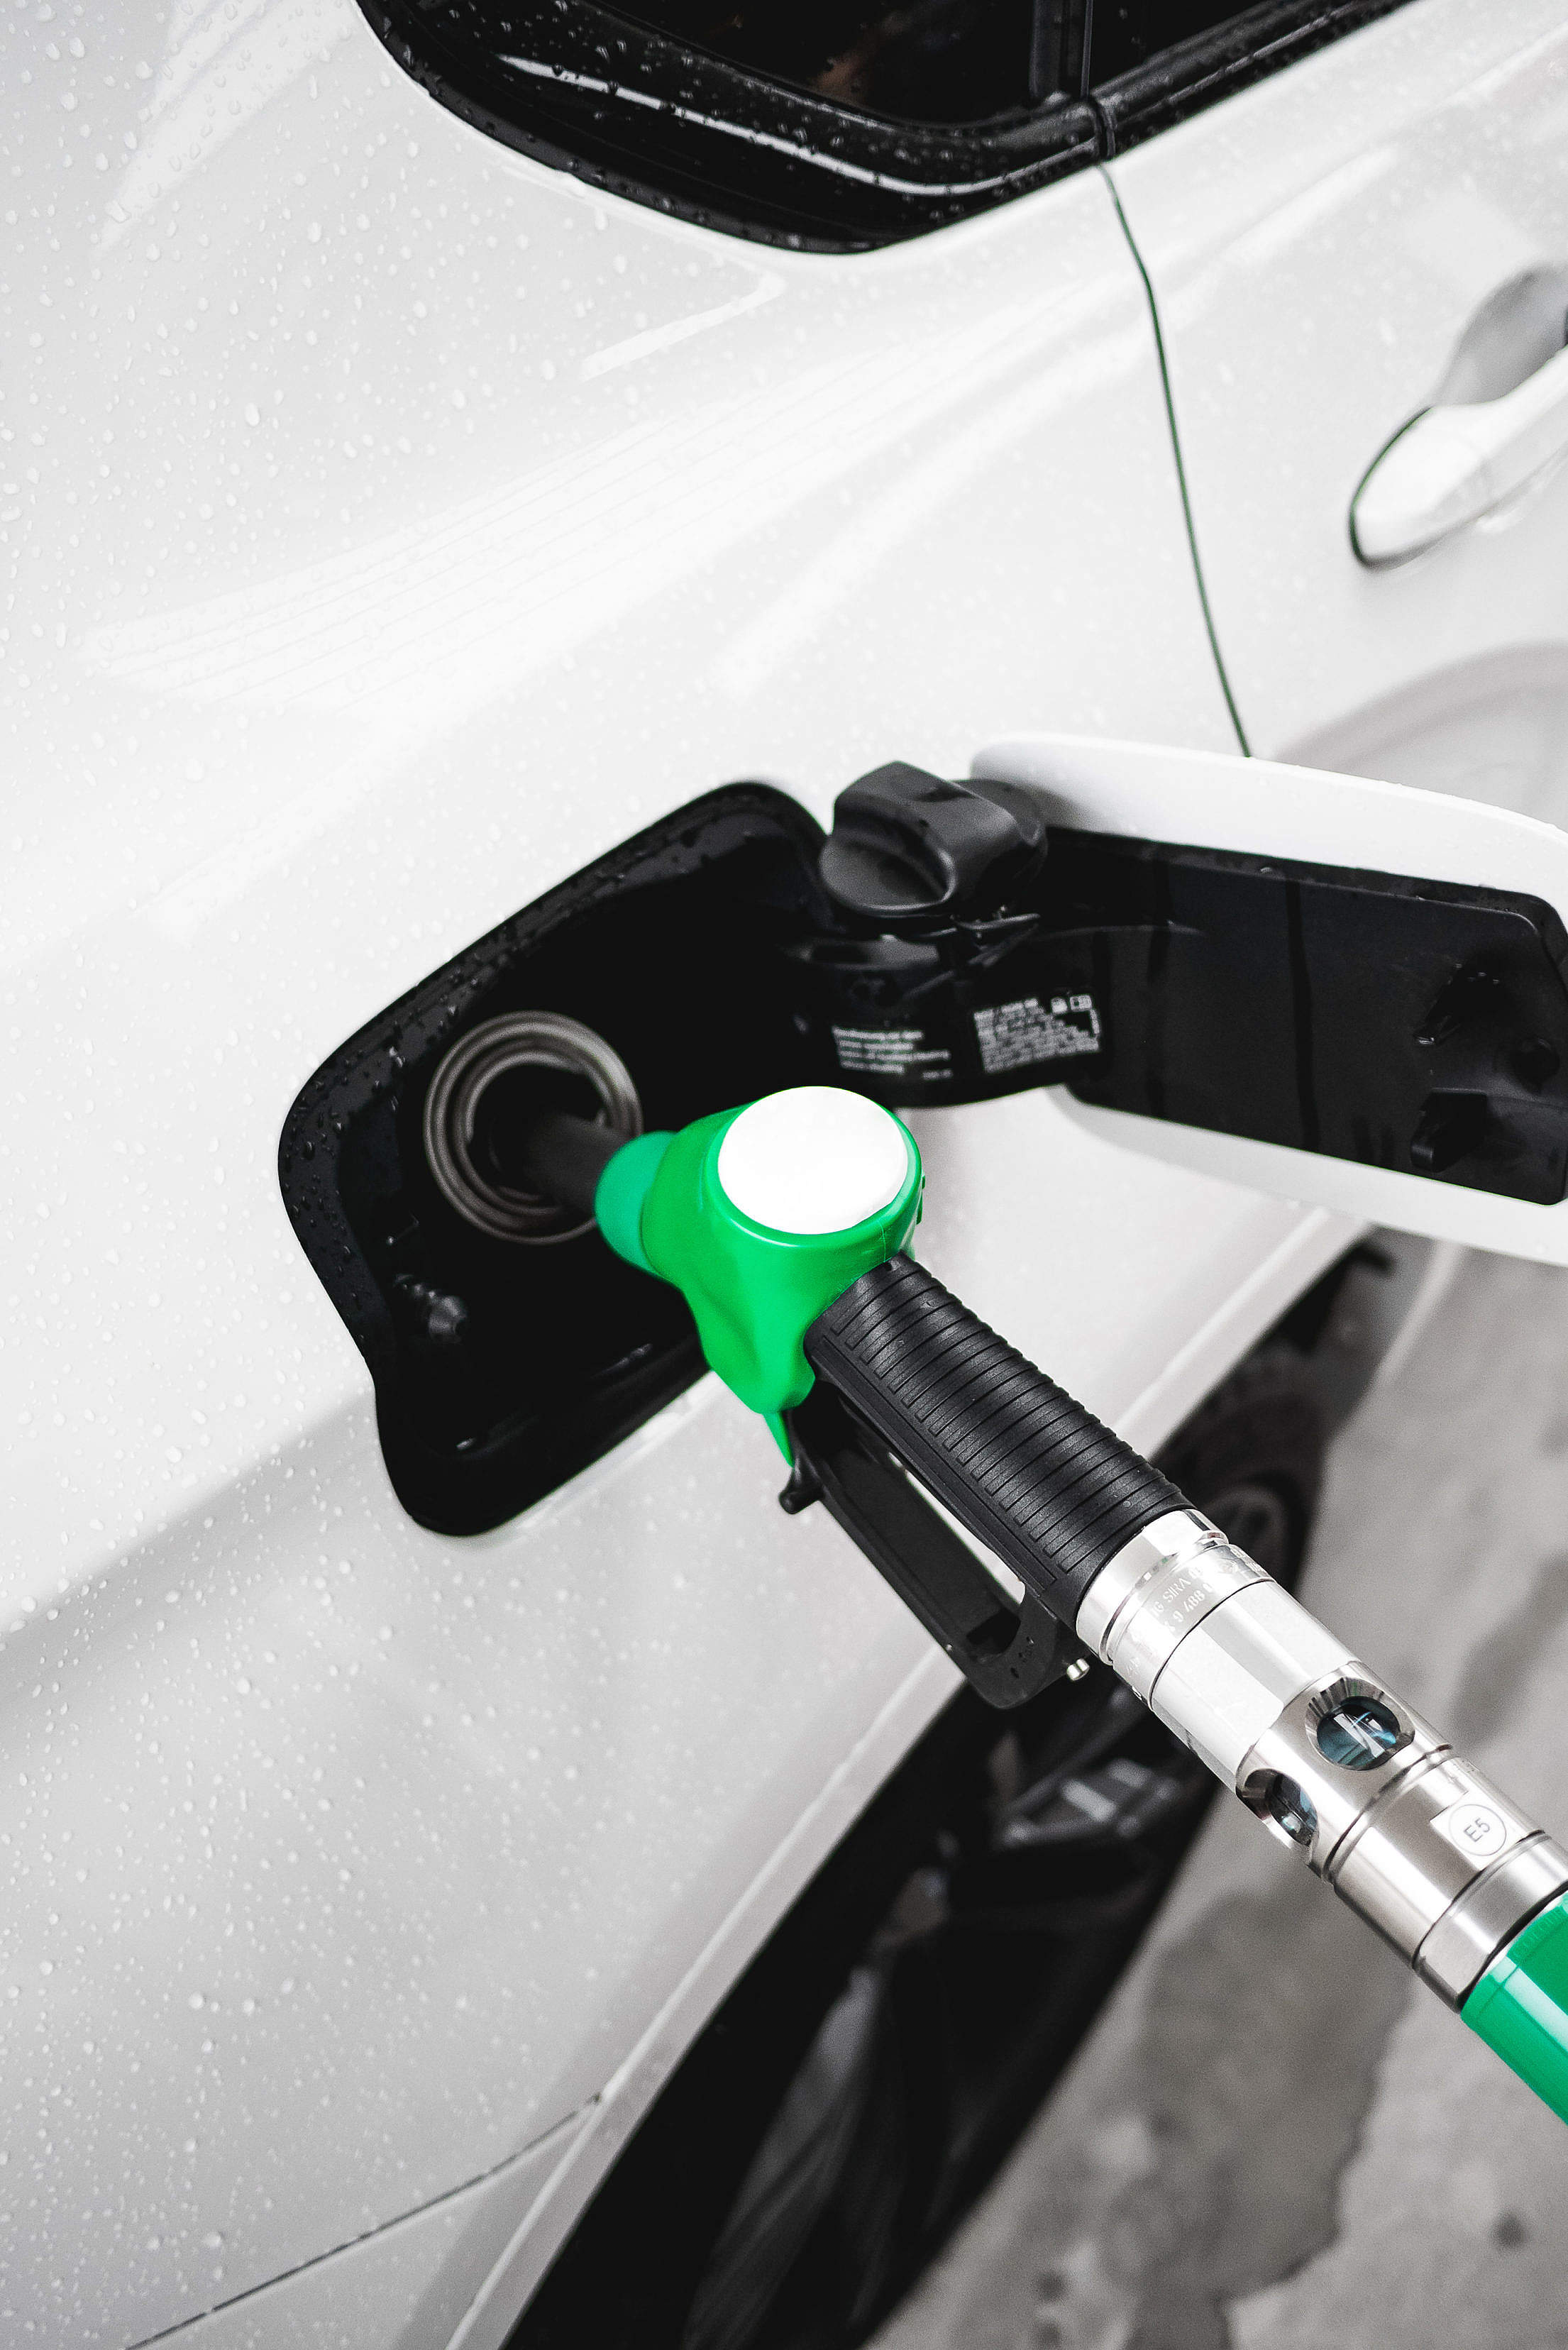 Fueling a Car Expenses Free Stock Photo